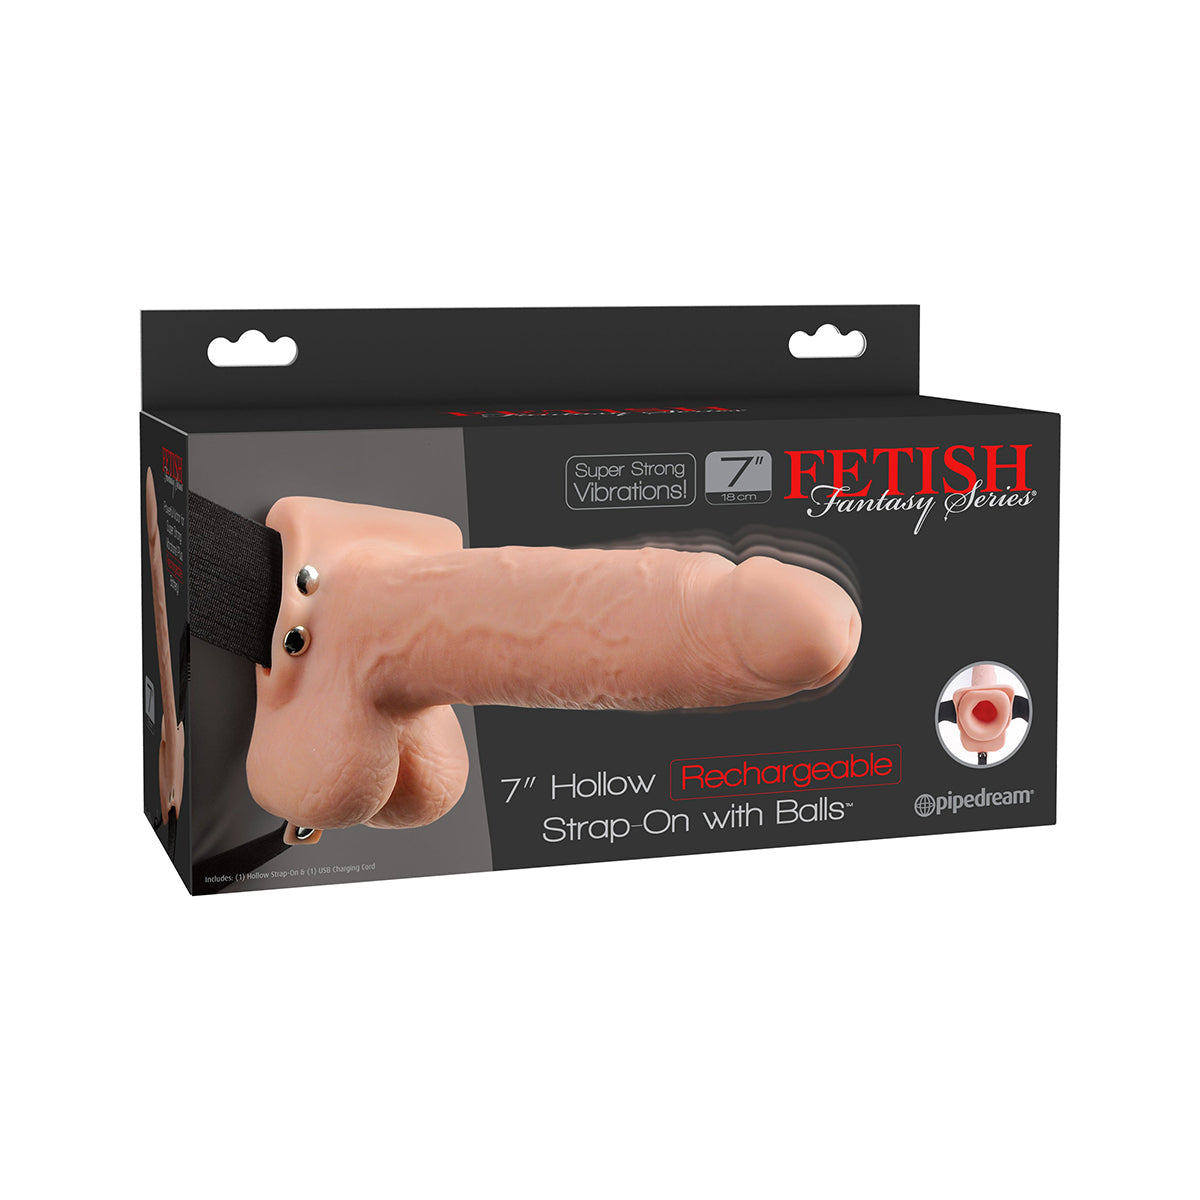 Fetish Fantasy 7" Hollow Rechargeable Strap-On with Balls - Flesh